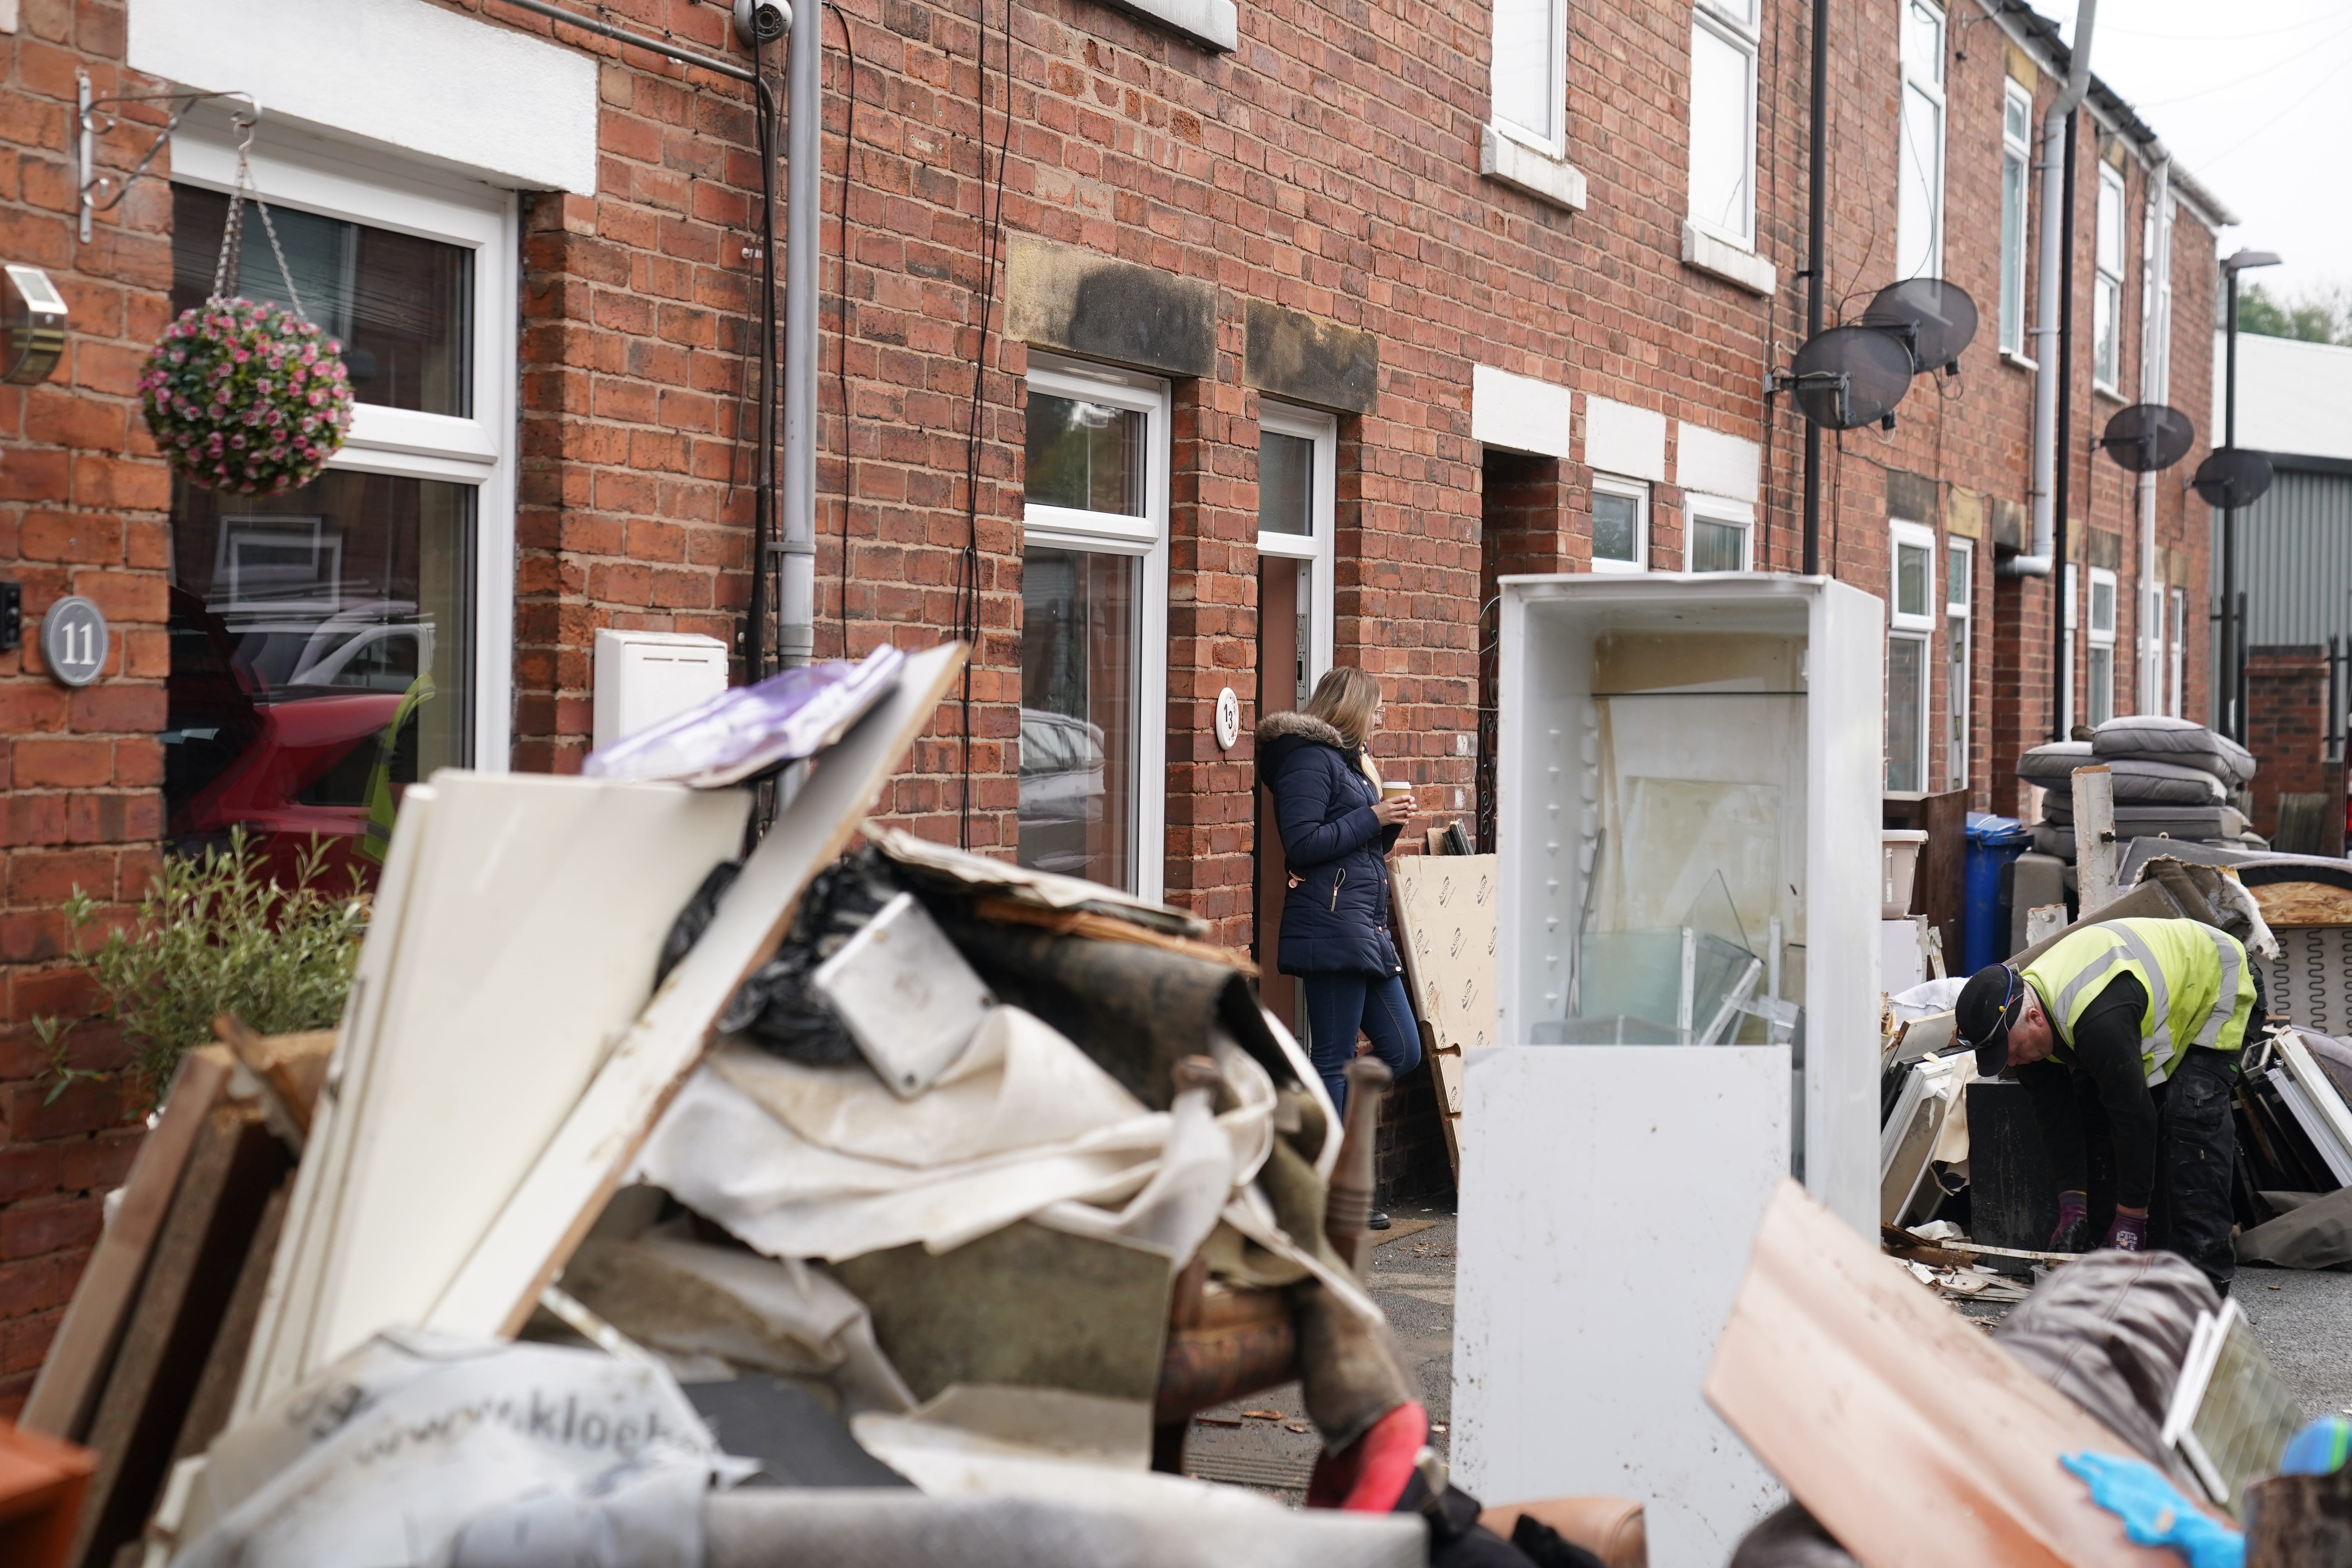 A resident looks at a local authority worker collecting damaged furniture from outside a property on Sherwood Street in Chesterfield, as the clean up begins in the aftermath of Storm Babet (Joe Giddens/PA)